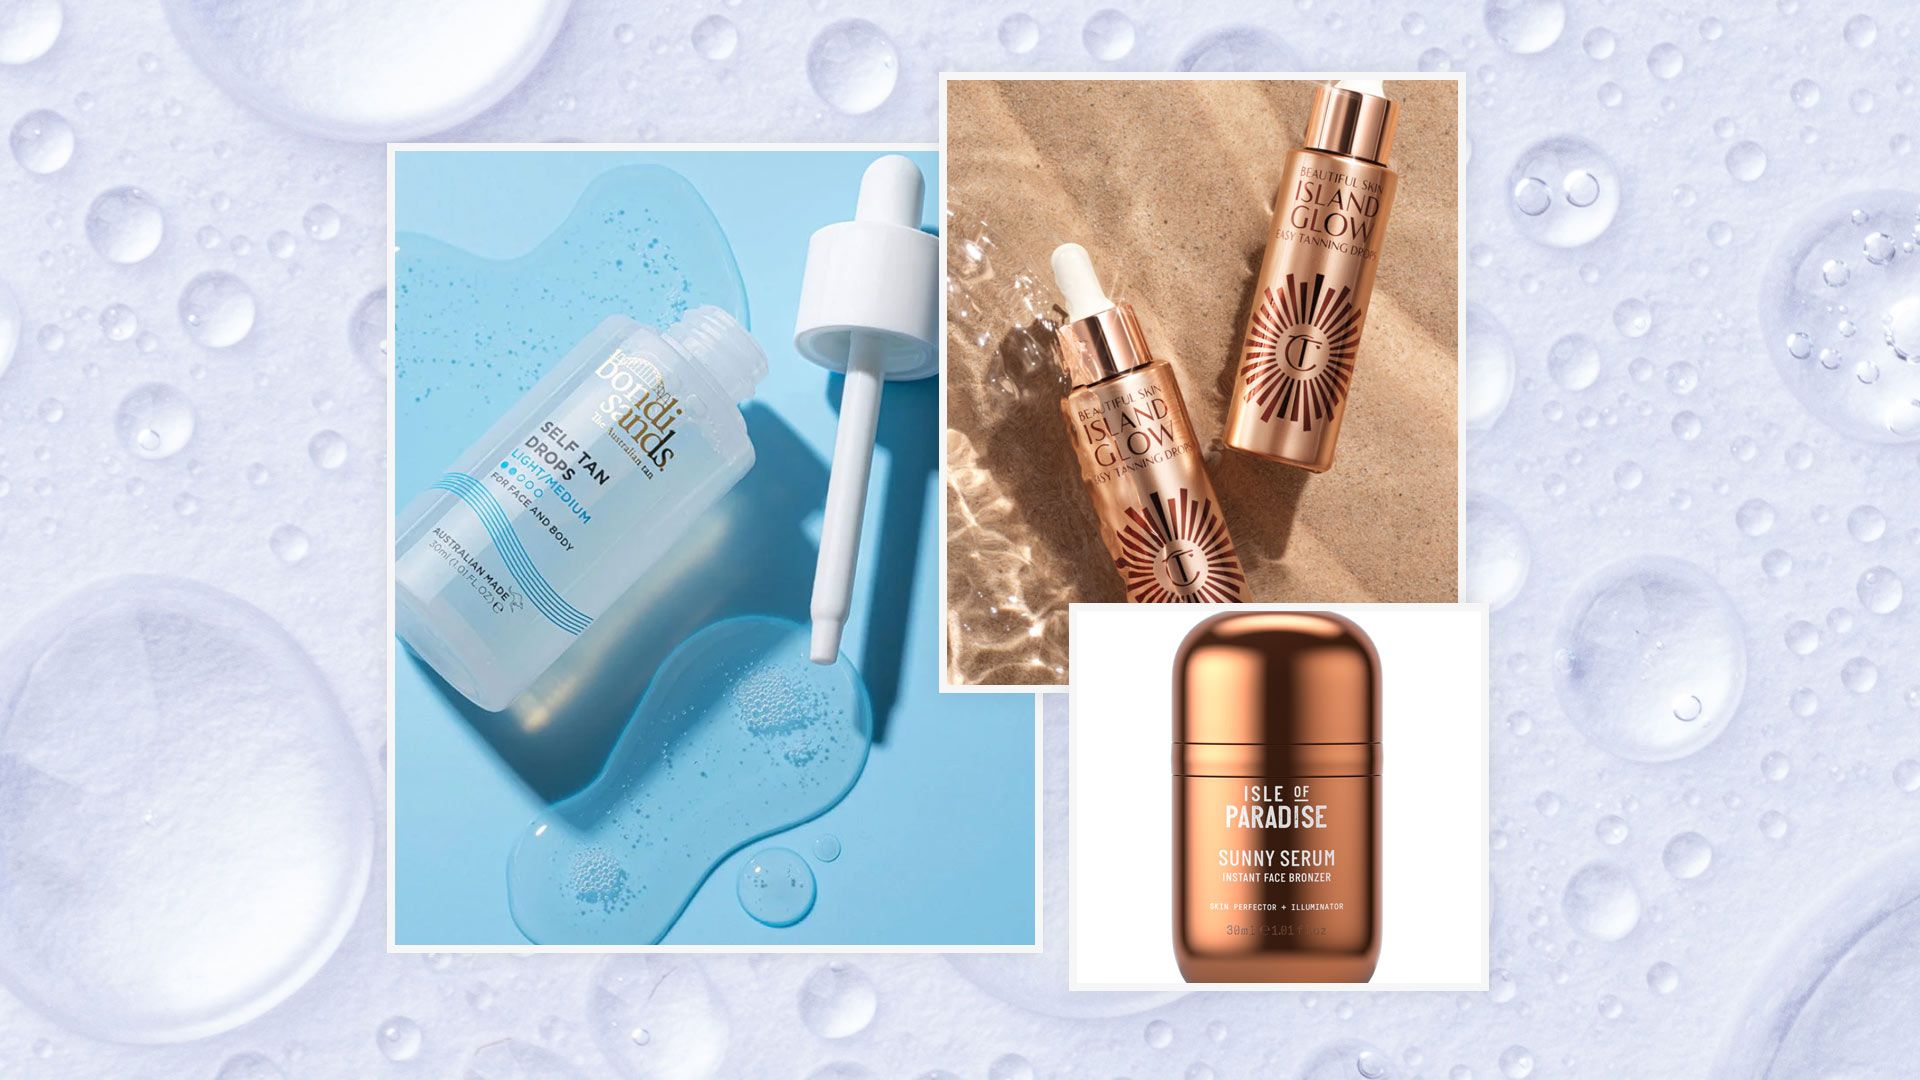 8 best tanning drops for your face to get your glow on: From Isle of Paradise to Charlotte Tilbury & the TikTok-famous must-have